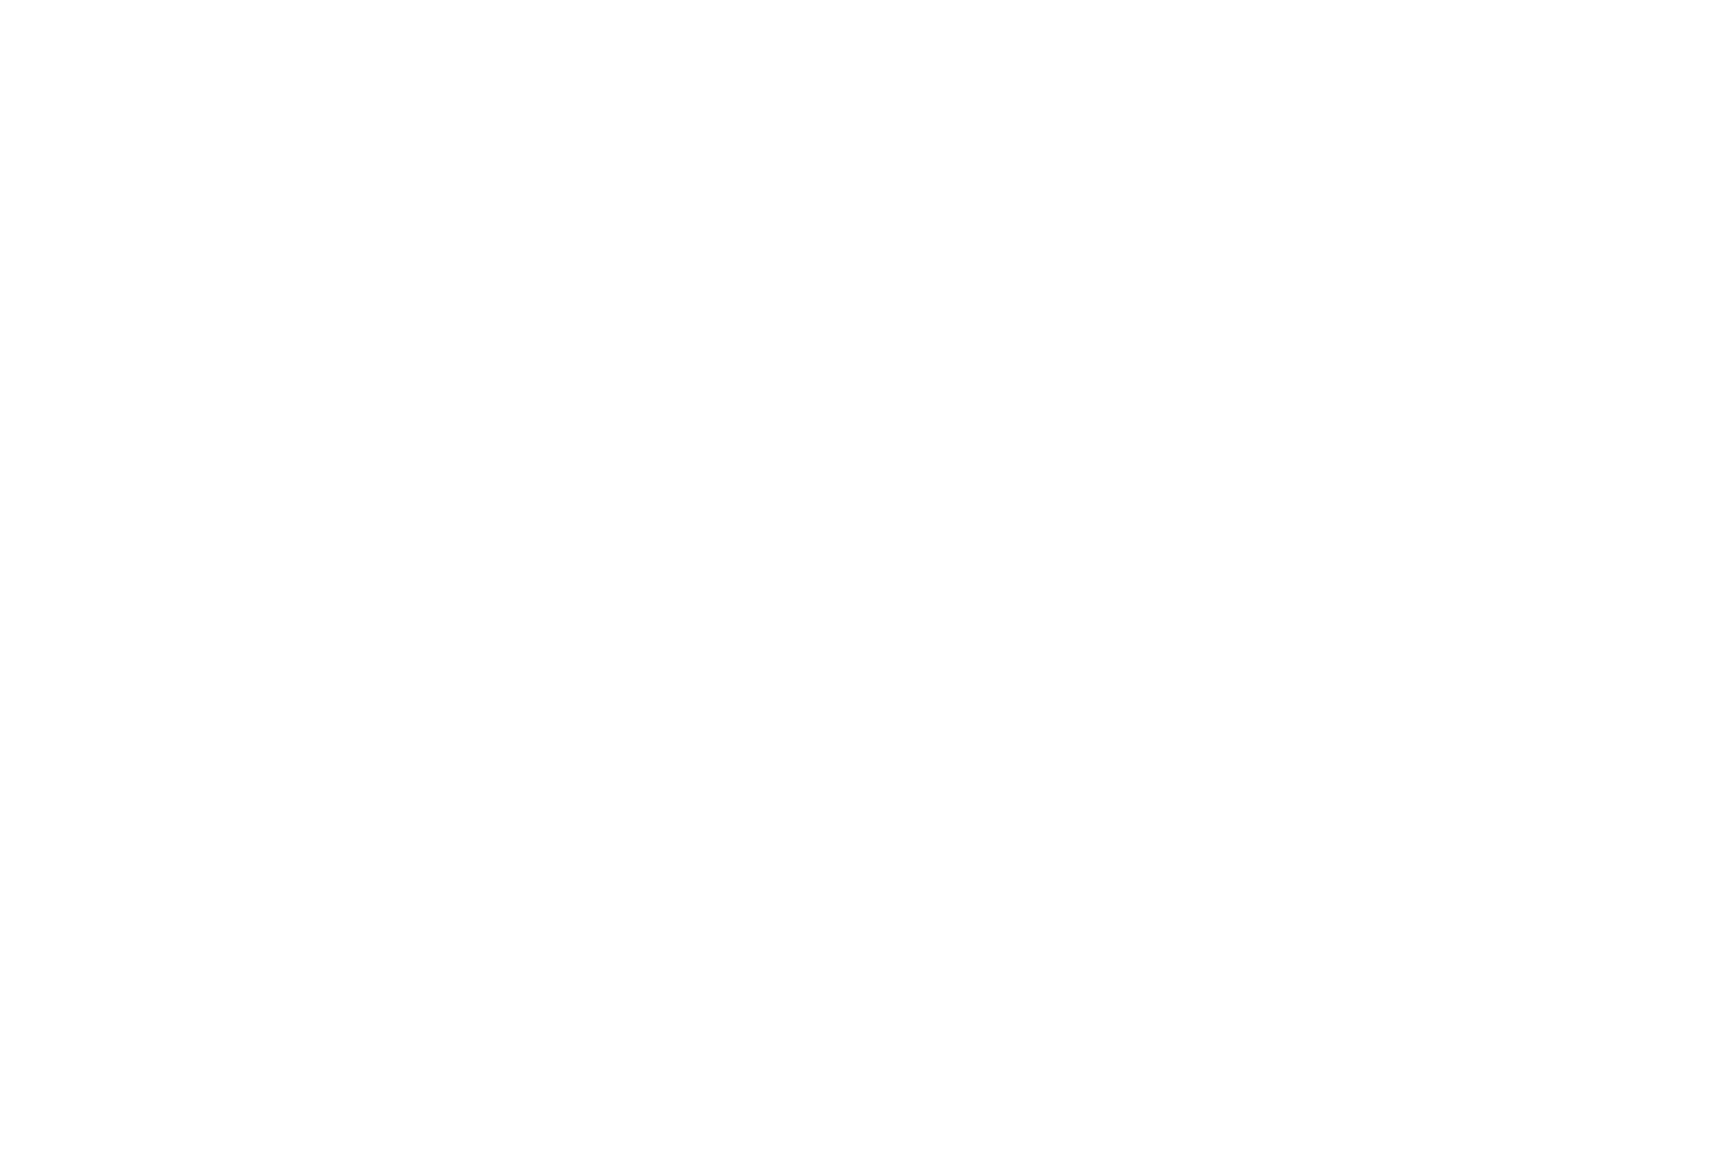 OFFICIAL SELECTION  - ROMA CINEDOC  - 2016.png